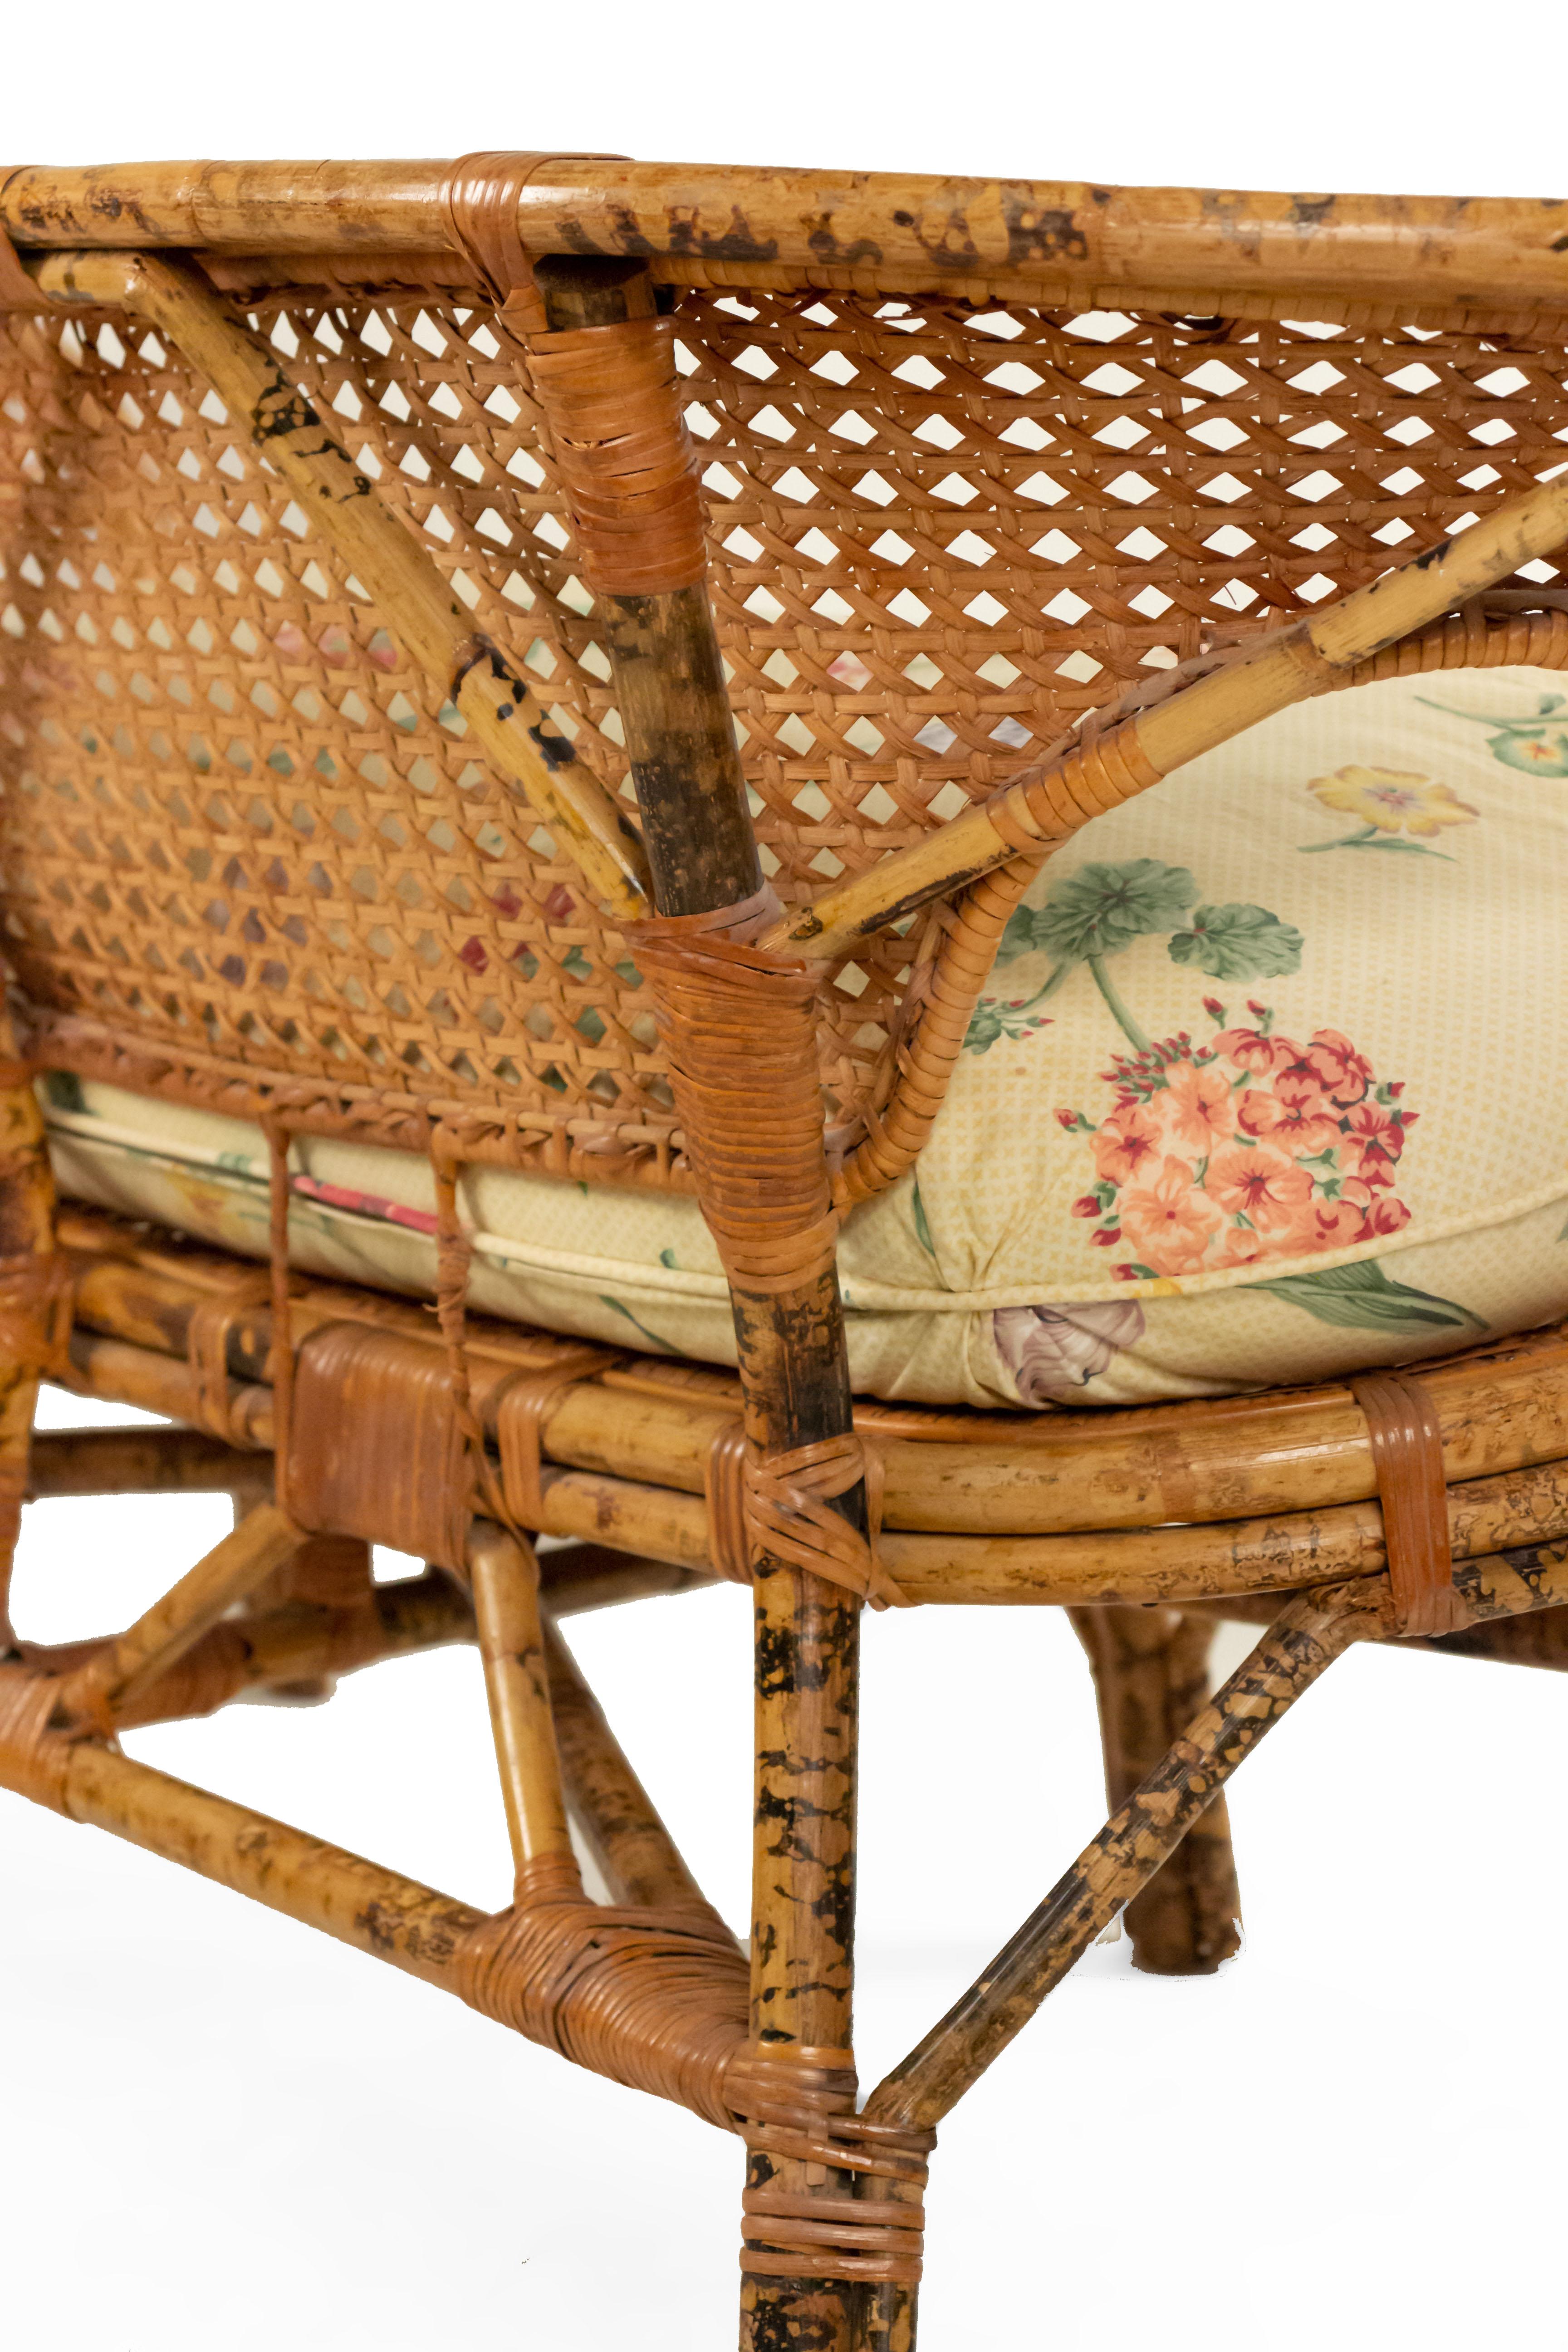 Midcentury Wicker Love Seat with Floral Upholstery For Sale 3